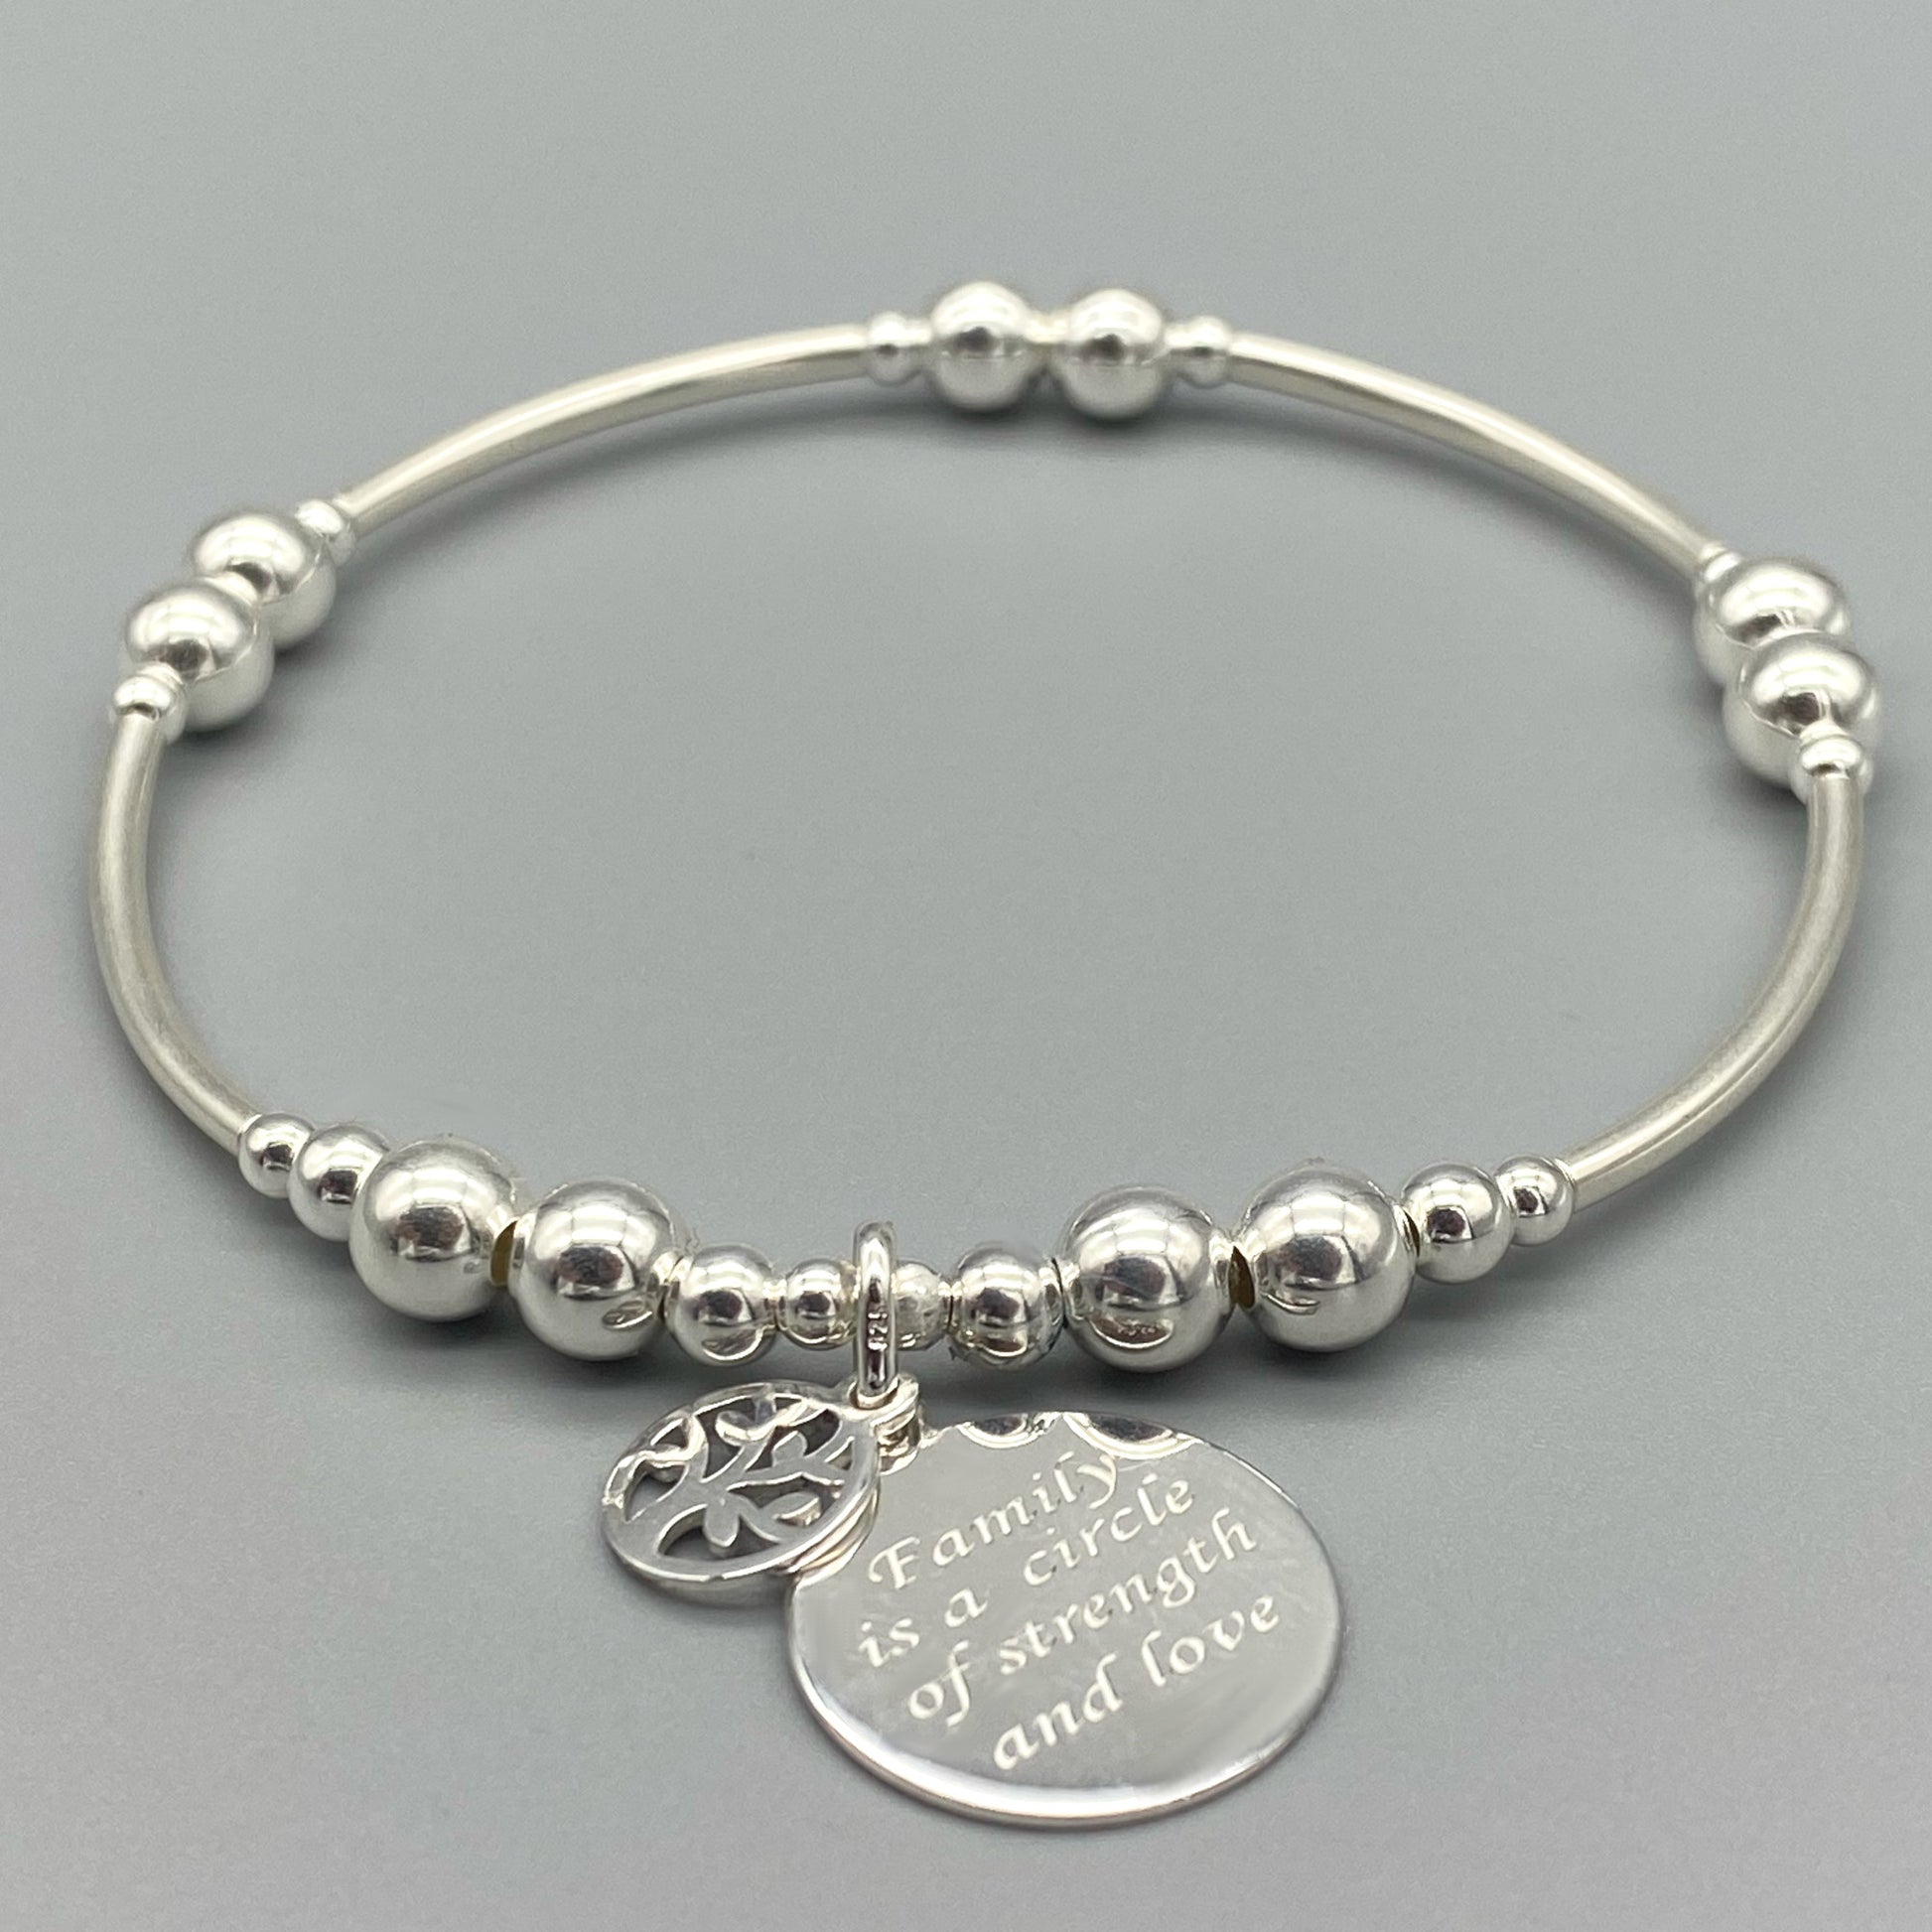 "Family is a Circle of Strength & Love" charm sterling silver stacking bracelet for her by My Silver Wish